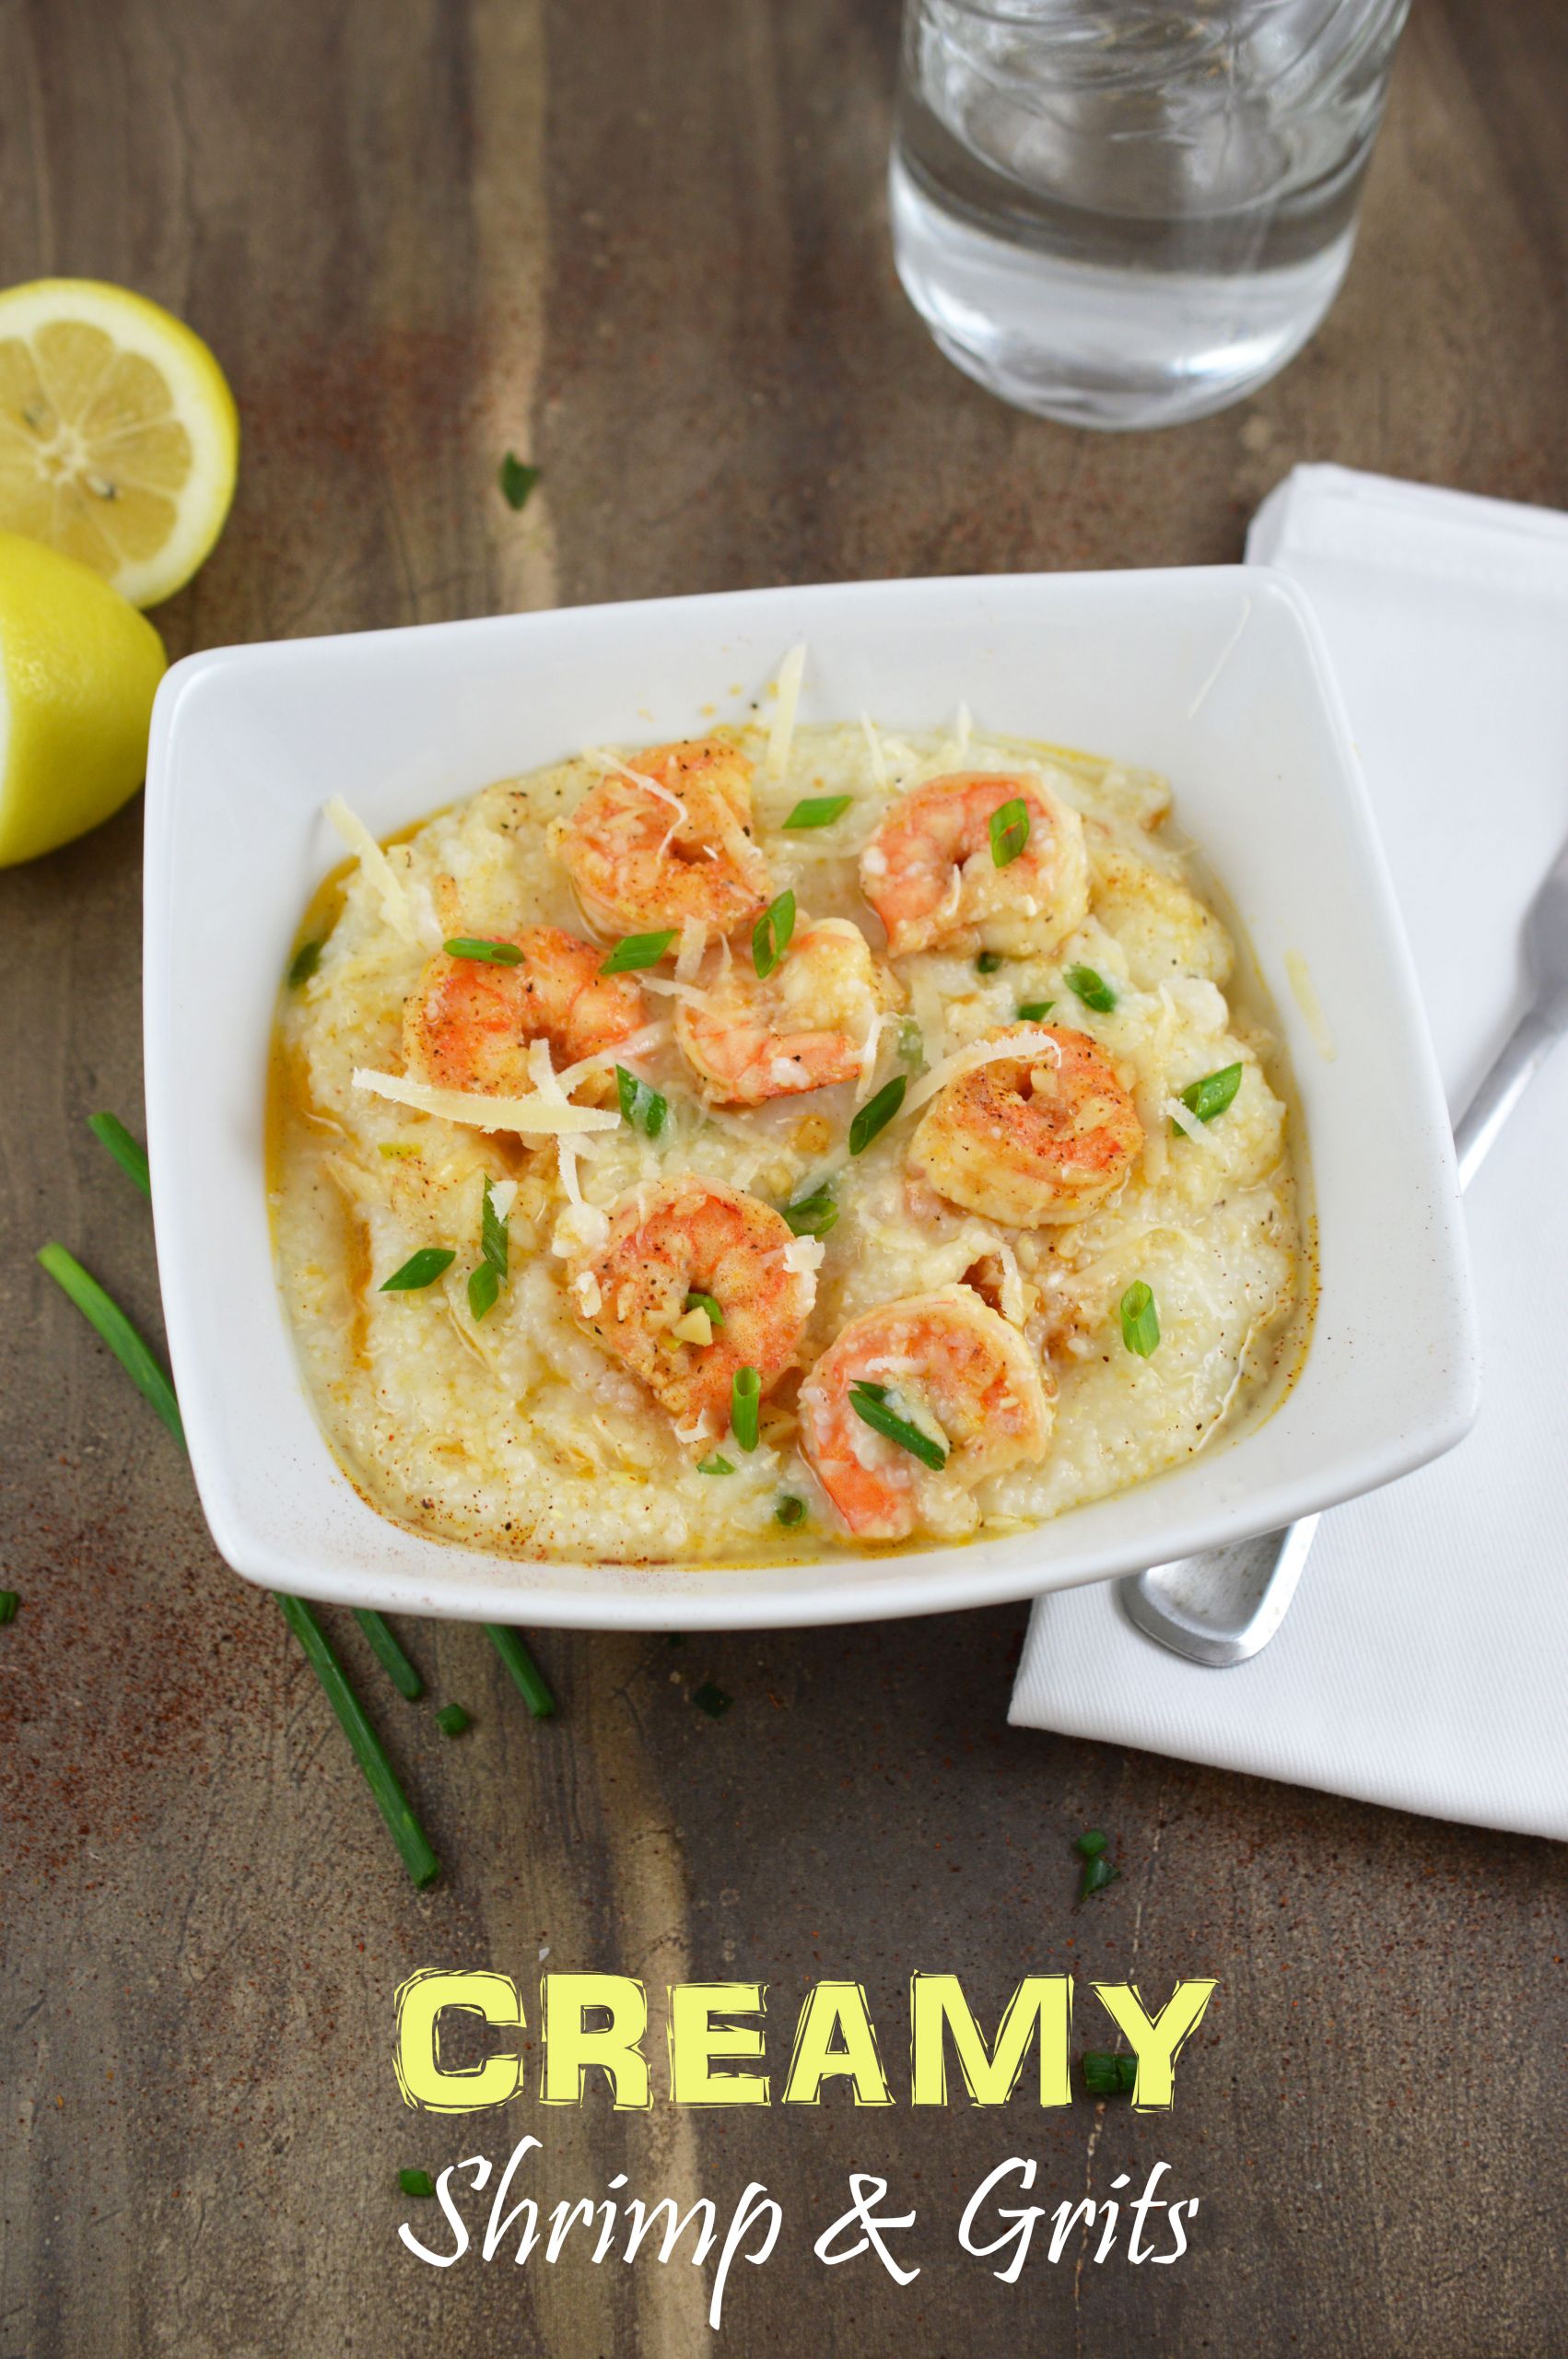 Best Shrimp And Grits Recipe
 Creamy Shrimp & Grits Chef Savvy